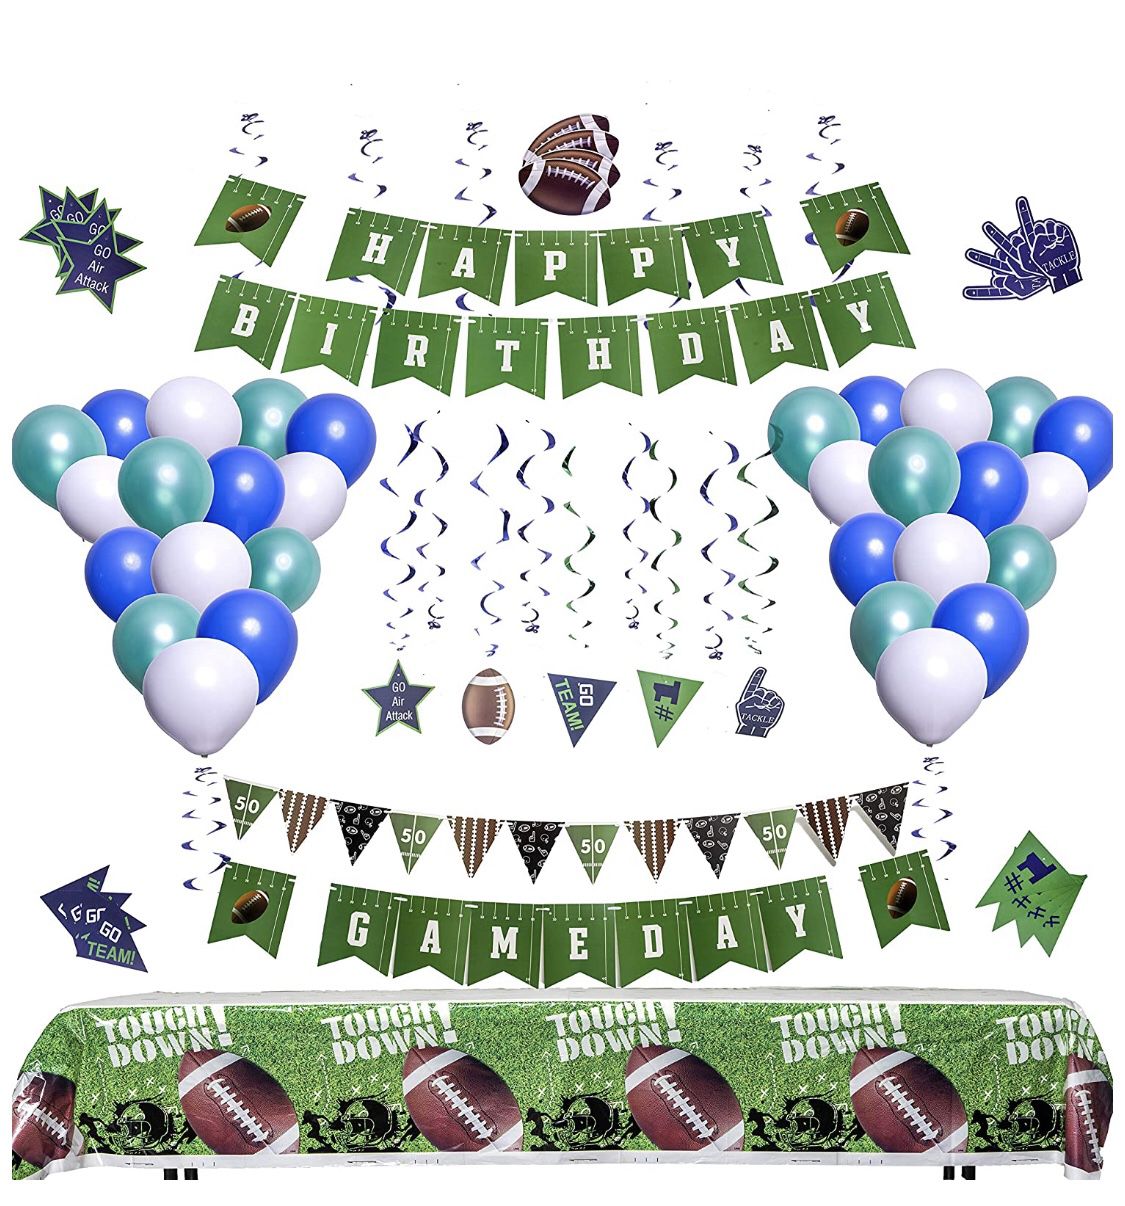 NEW! Football Party Decorations [81 Piece Set] | Football Party Supplies | Football Tablecloth | Football Gameday and Happy Birthday Banner | Footbal